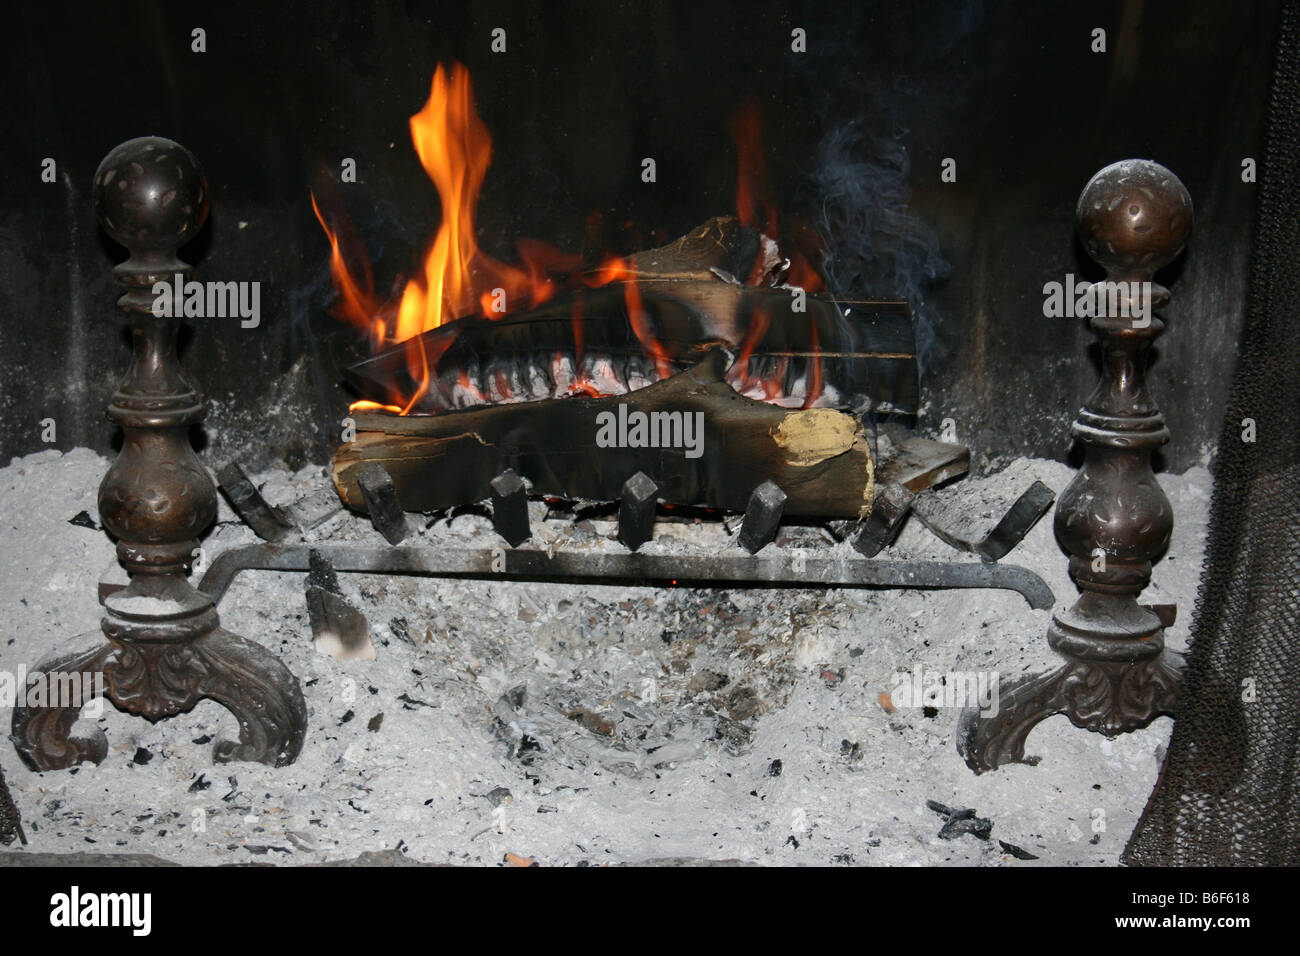 Tranquility Romance or Warmth a nice fire in the fireplace means many things to many people Stock Photo